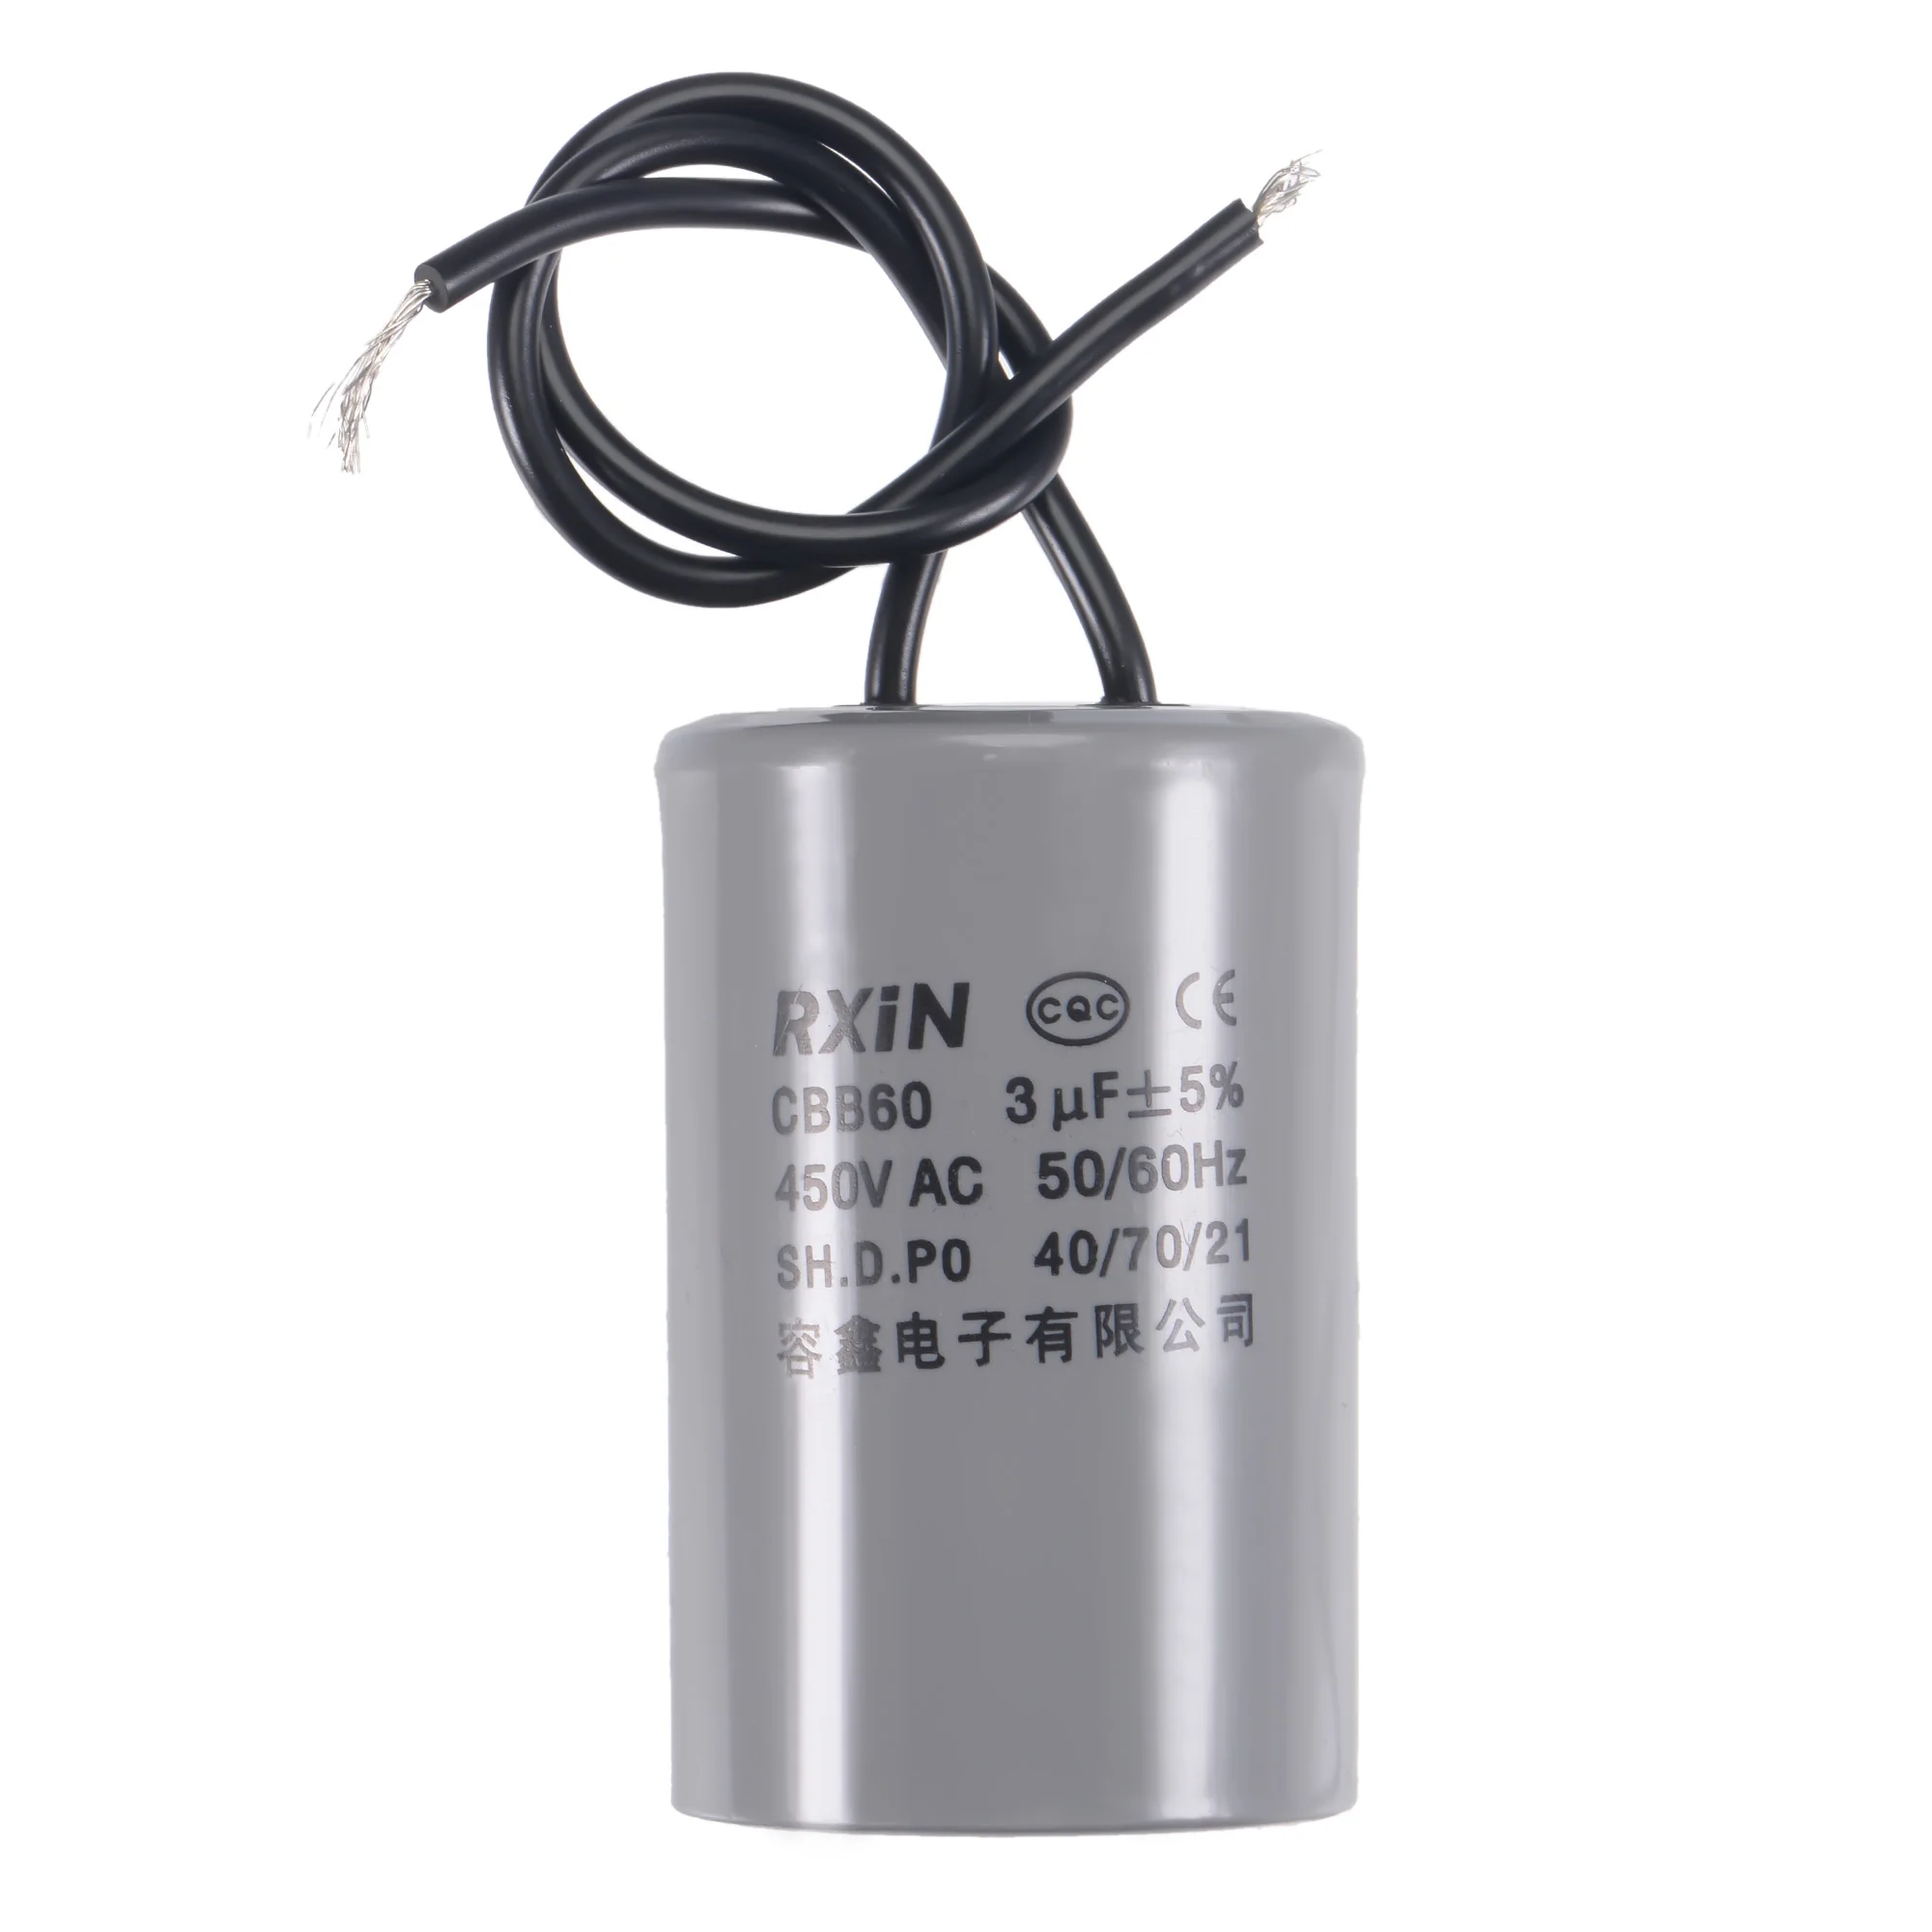 

1pcs CBB60 Motor Run Capacitor 3uF 450V AC 2 Wires 50/60Hz Cylinder 54x34mm for Air Compressor Water Pump Motor